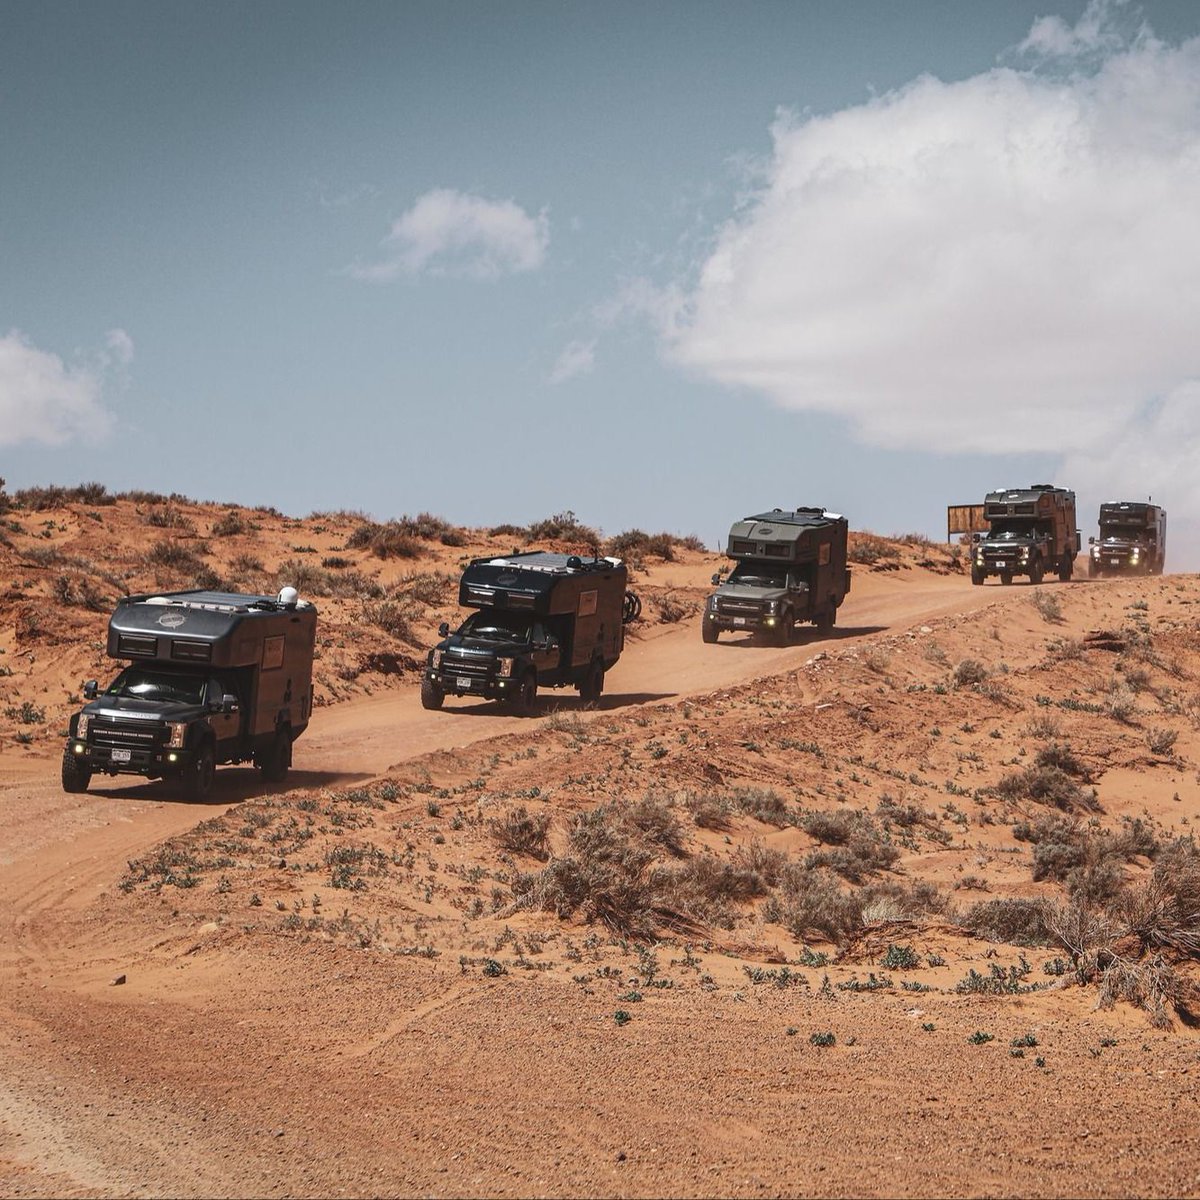 An EarthRoamer Convoy: Ready for rugged trails, off-grid living, and endless memories. · · · #earthroamer #offroad4x4 #expeditionvehicle #campinglife #overlanding #4x4life #4x4trucks #vanlife #vanlifeadventures